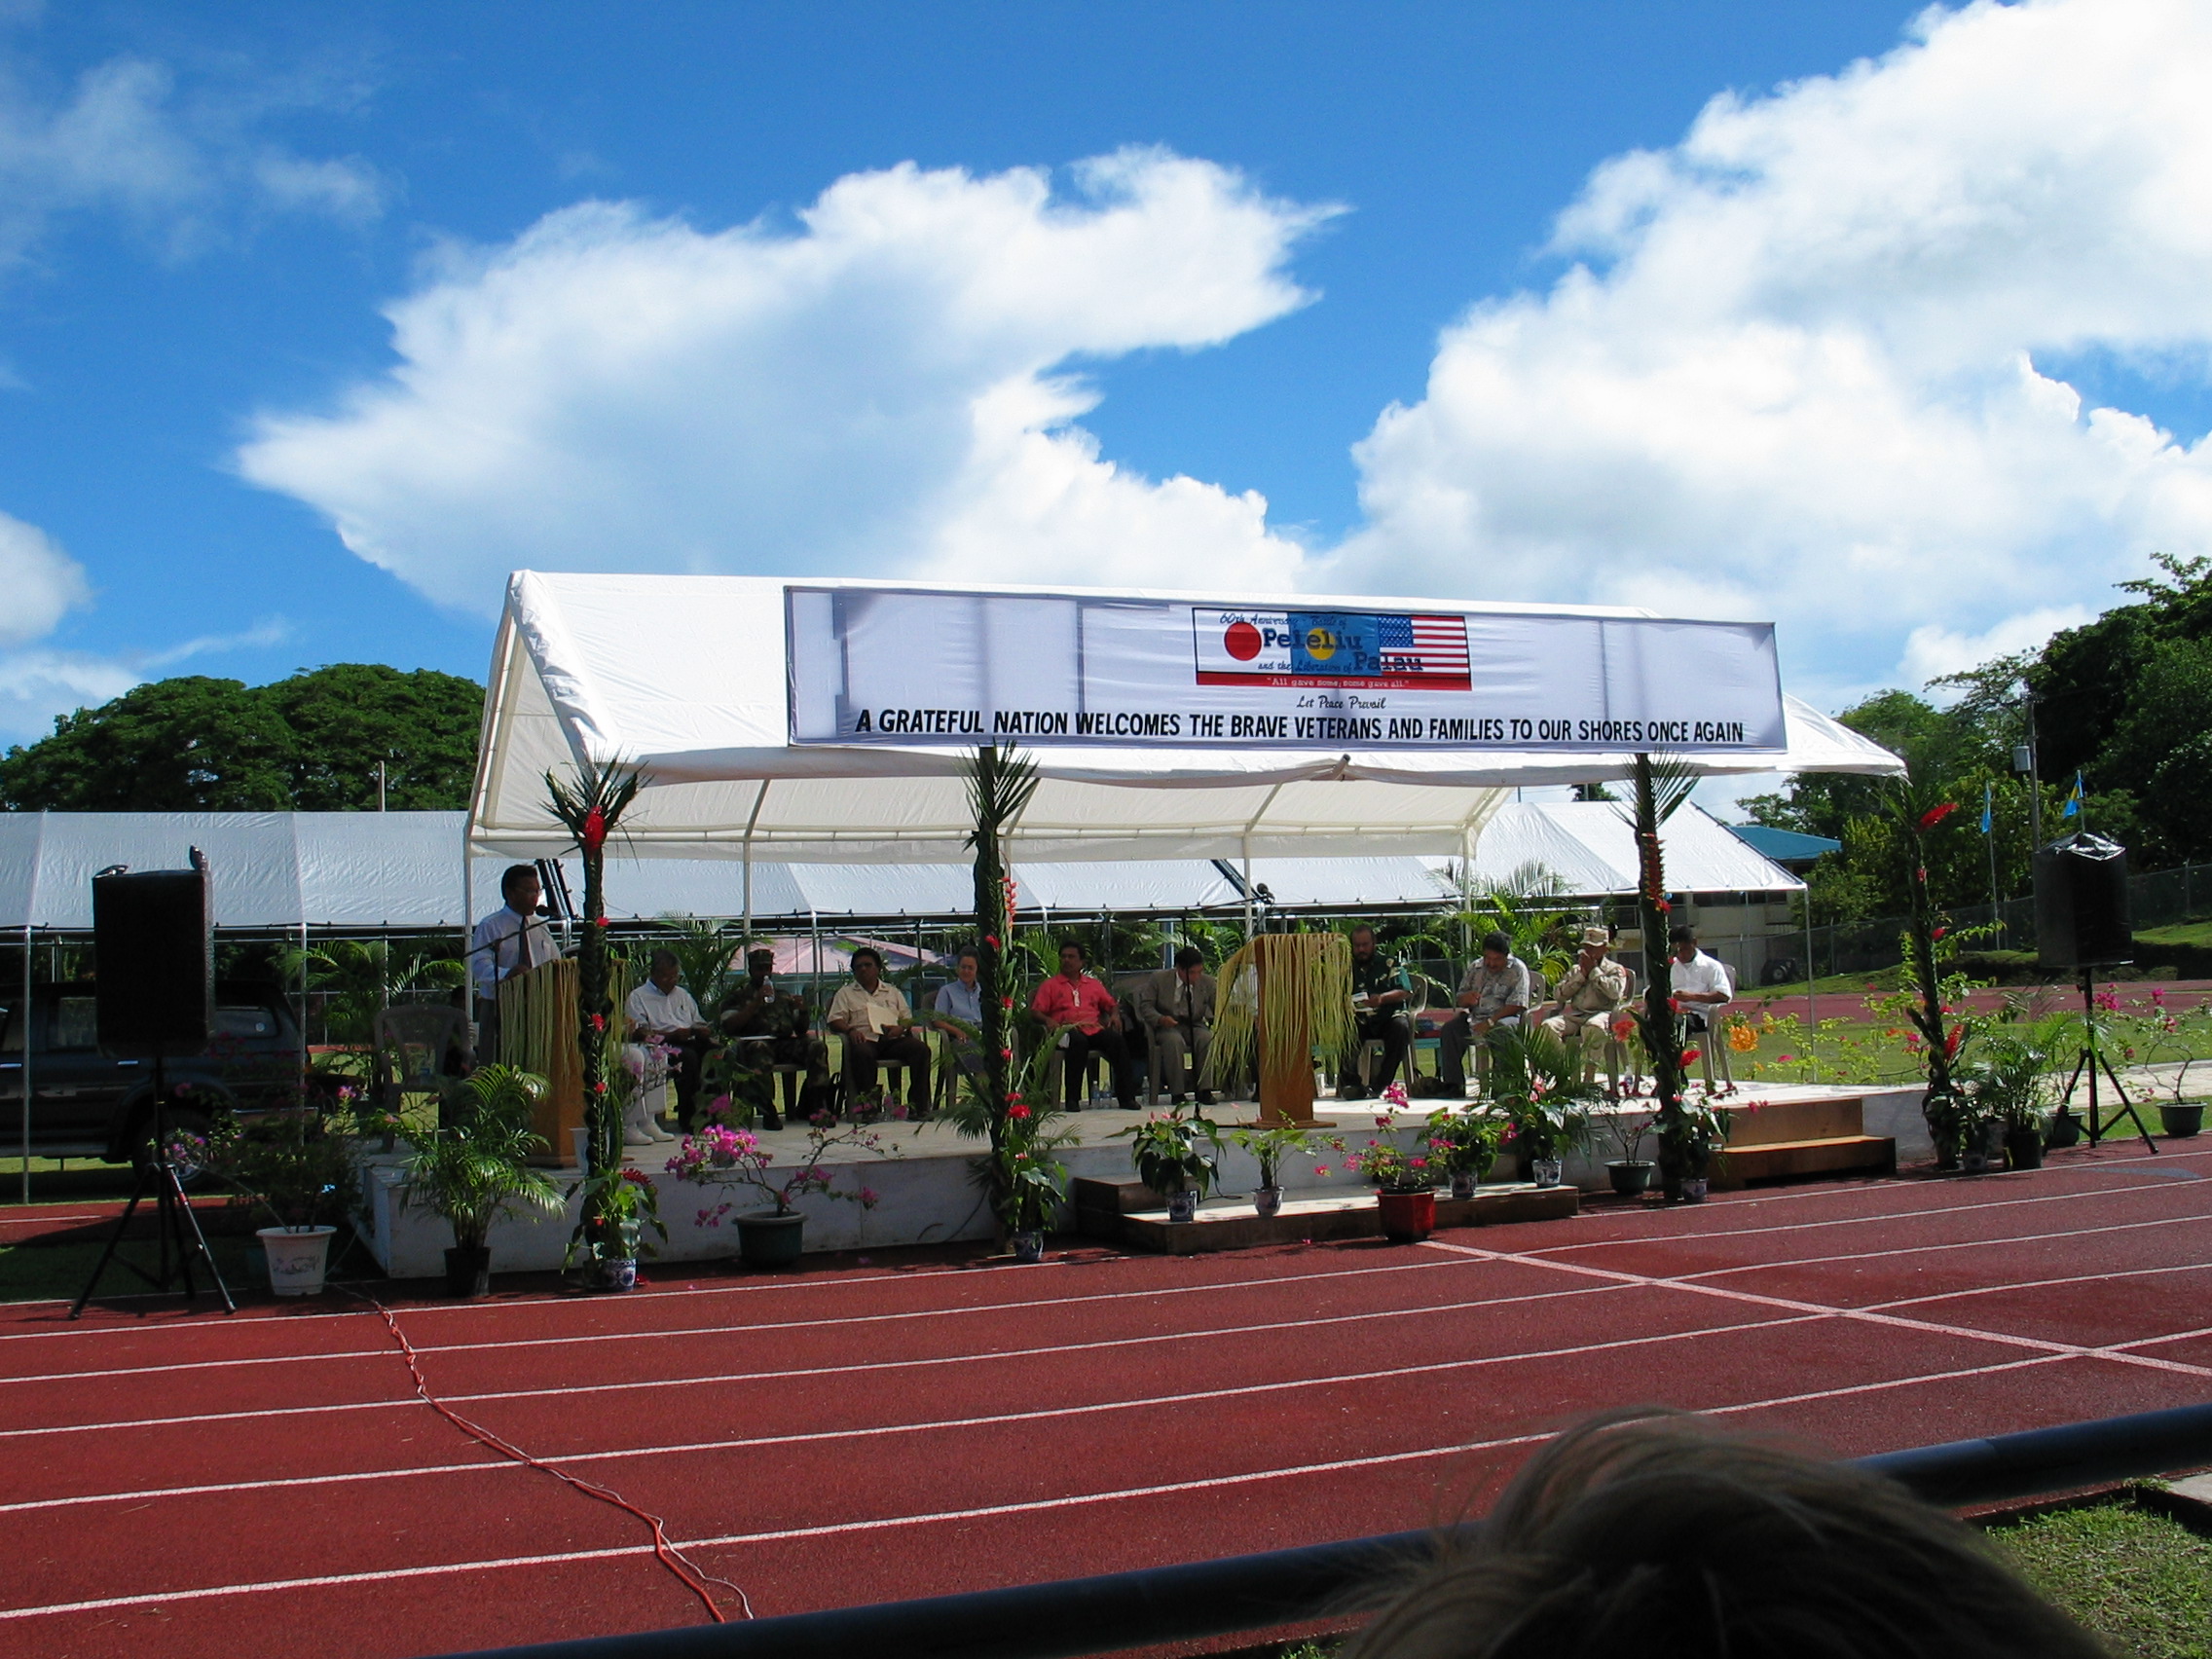 track and field with tent and spectators